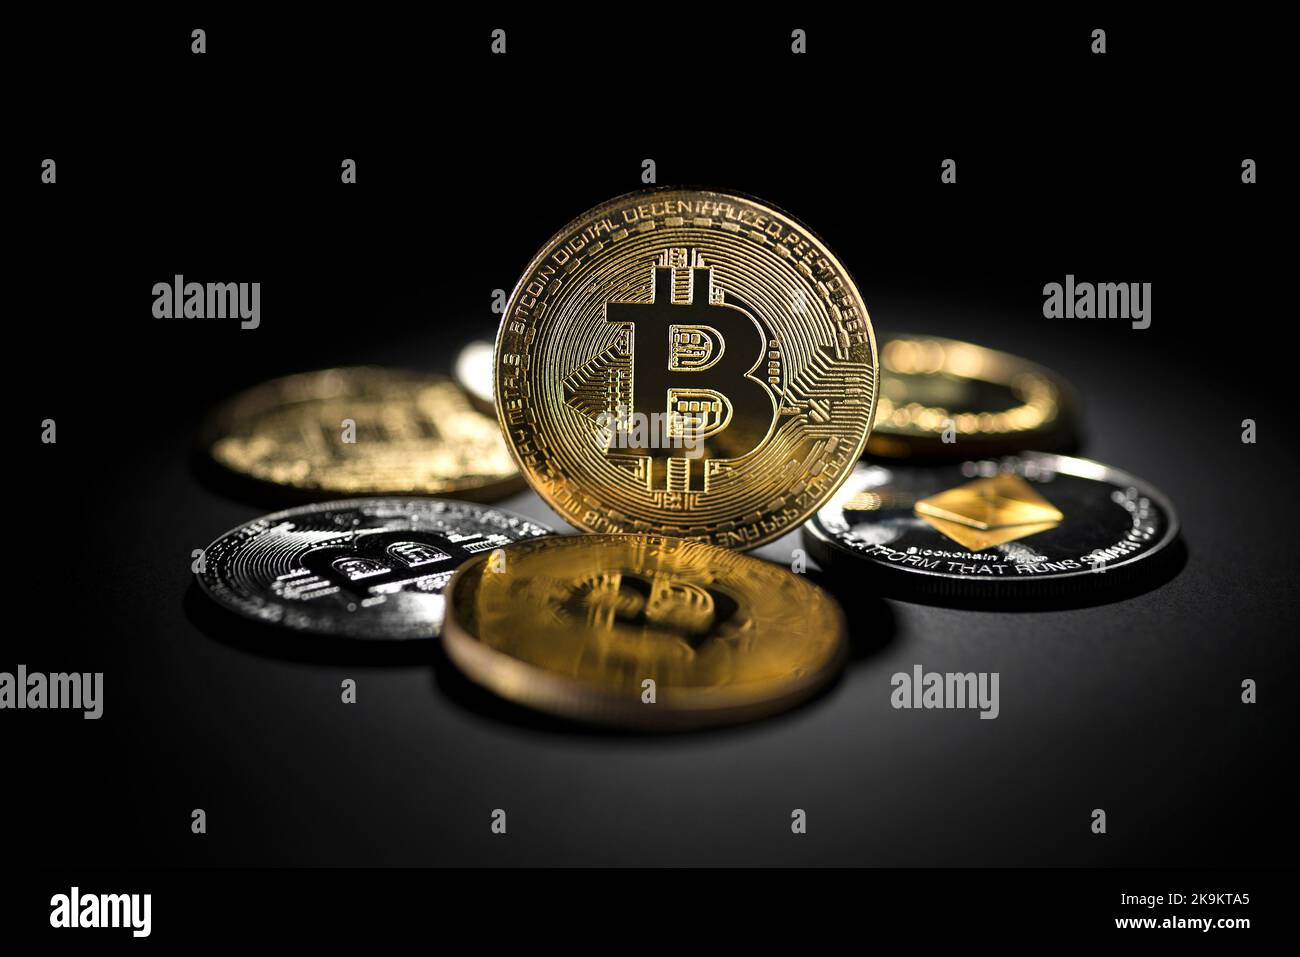 Bitcoin coins and altcoins in black background. Virtual cryptocurrency concept. Stock Photo